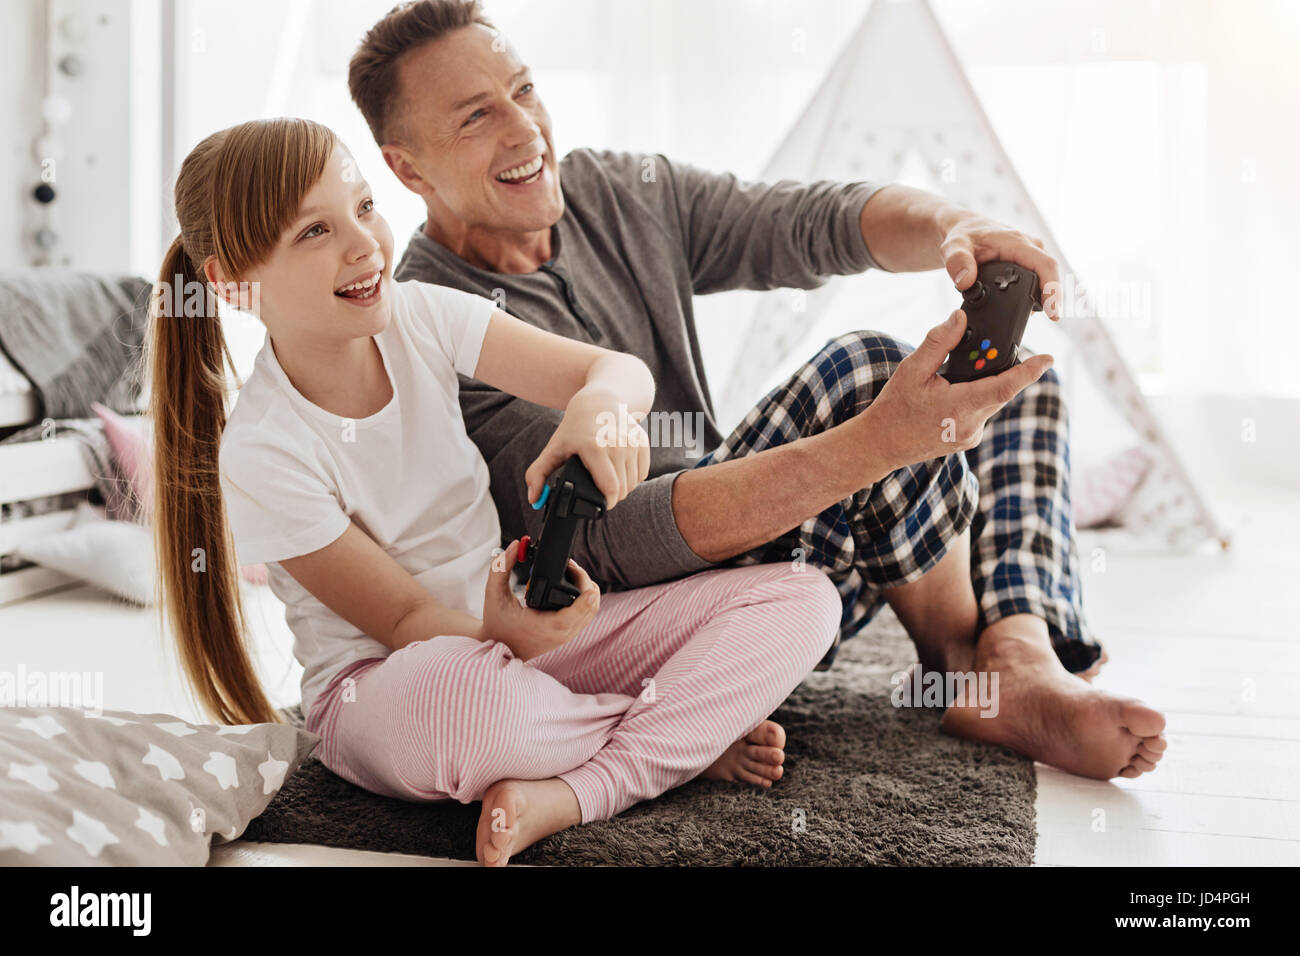 Passionate active family having fun with video games Stock Photo